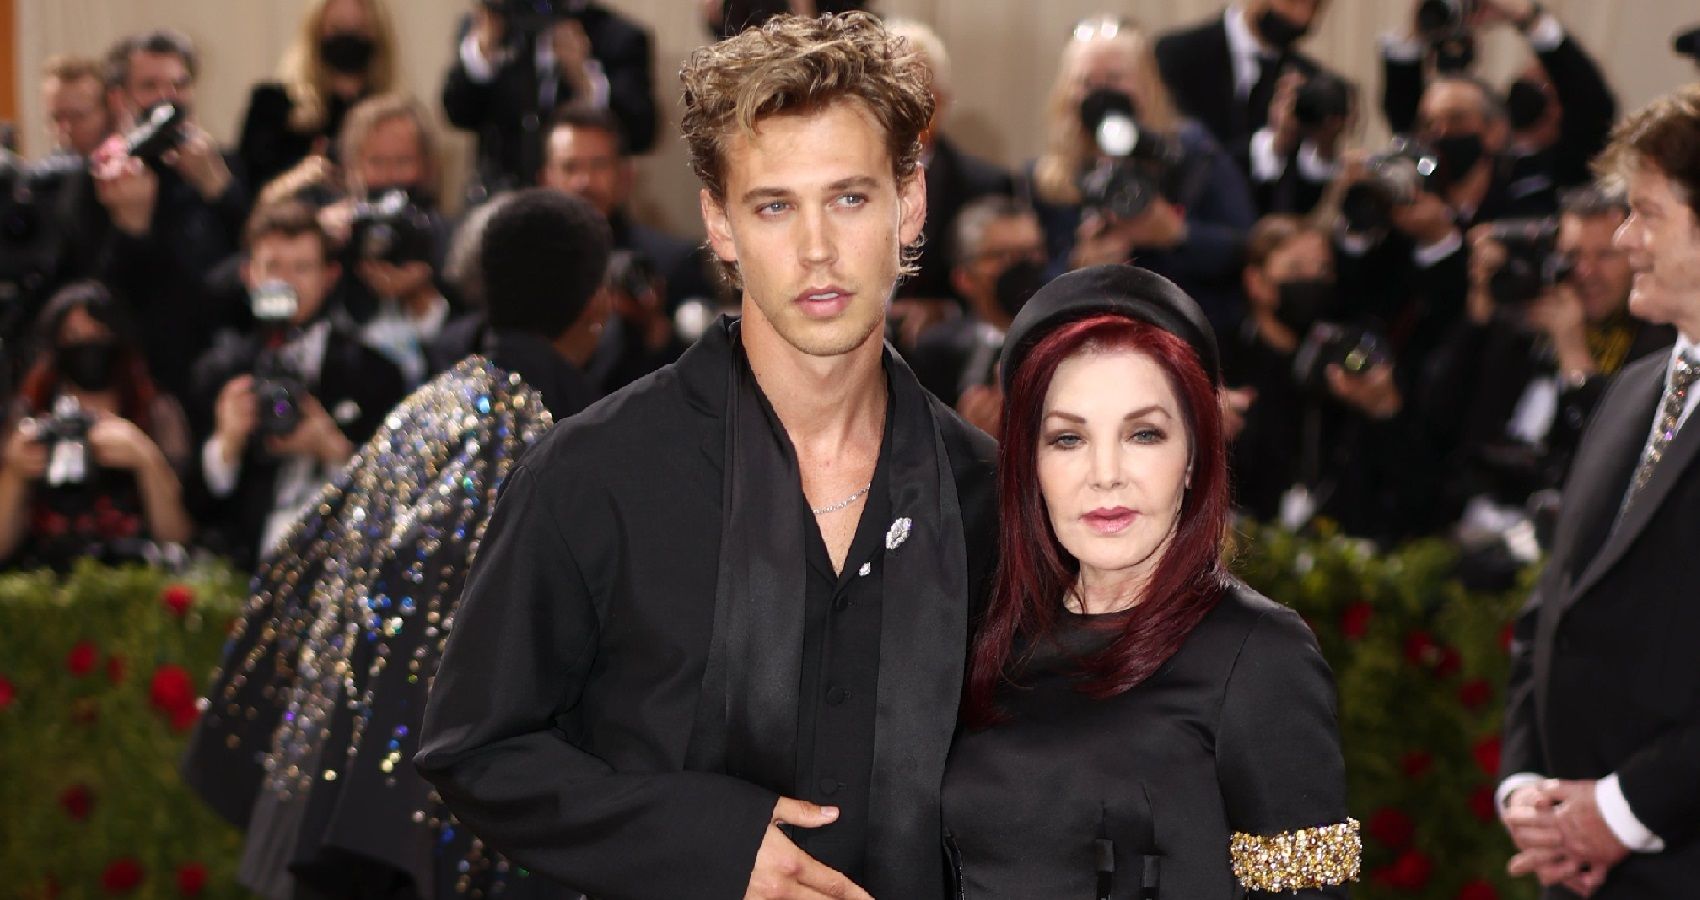 Priscilla Presley and Austin Butler on the red carpet